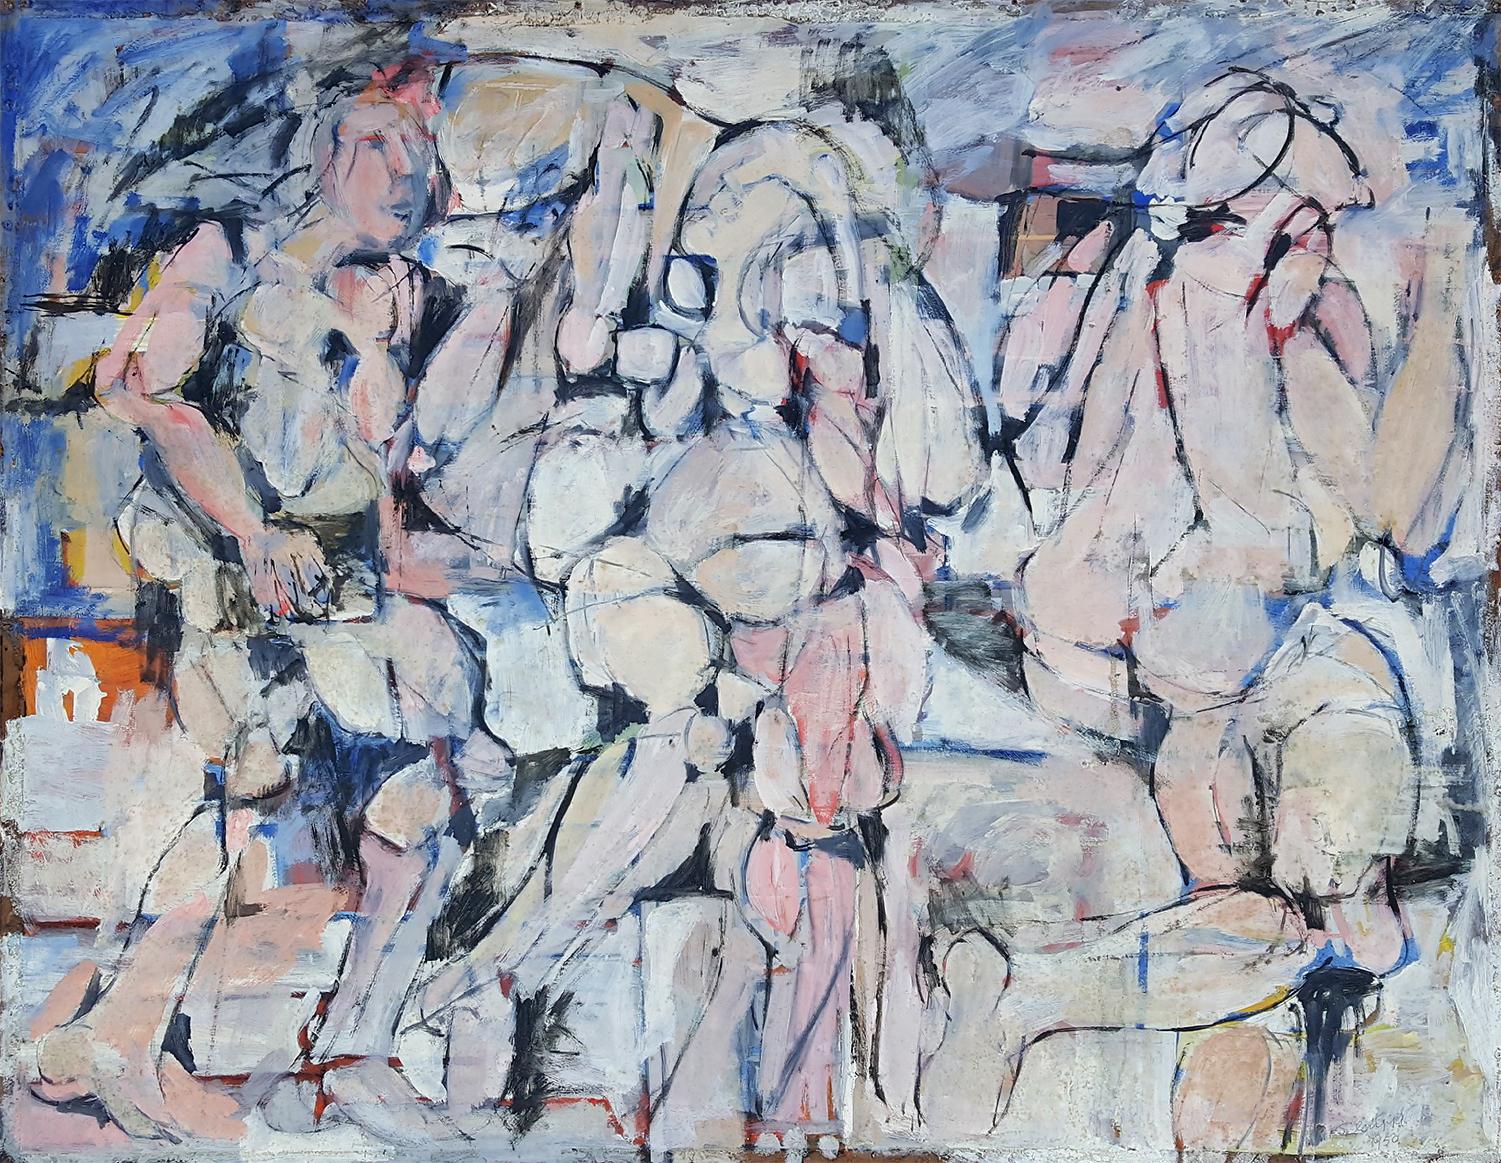 Salvatore Grippi Figurative Painting - Figures Running - Early Abstract Expressionism like Willem de Kooning